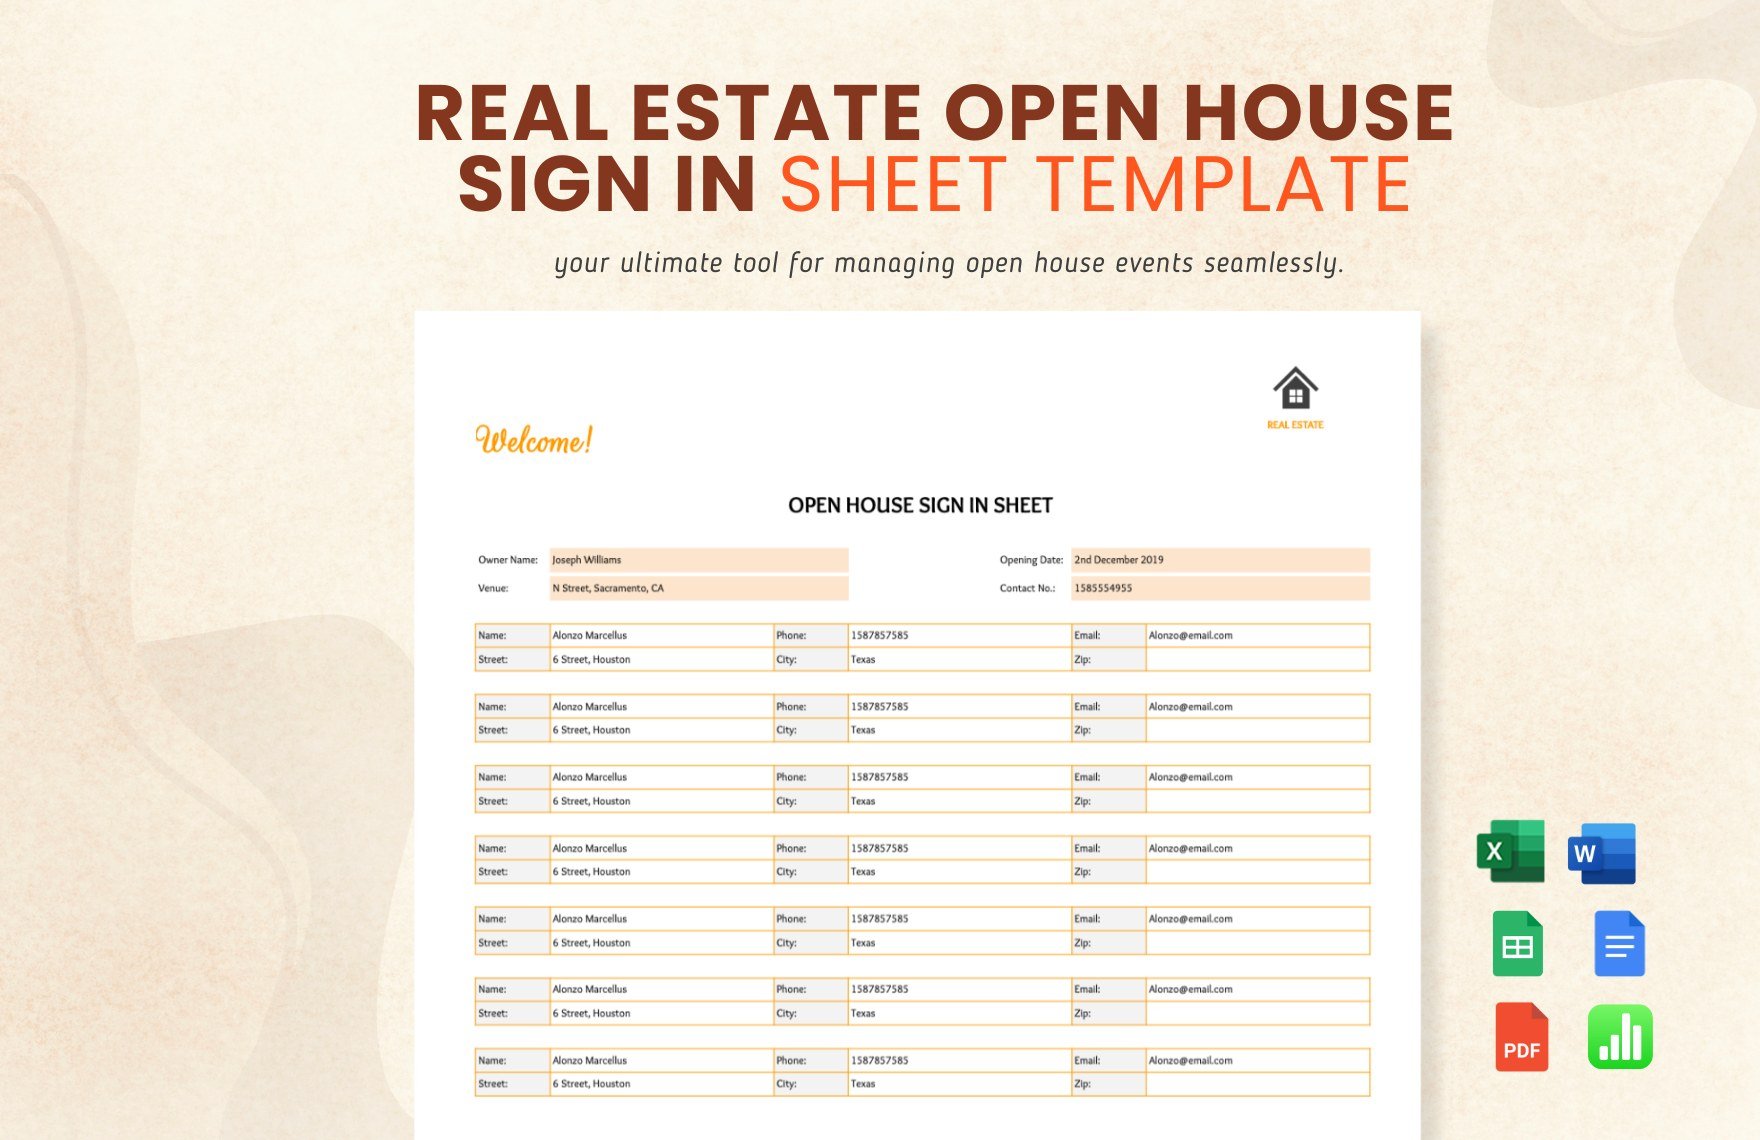 Real Estate Open House Sign in Sheet Template in Word, Google Docs, Excel, PDF, Google Sheets, Apple Pages